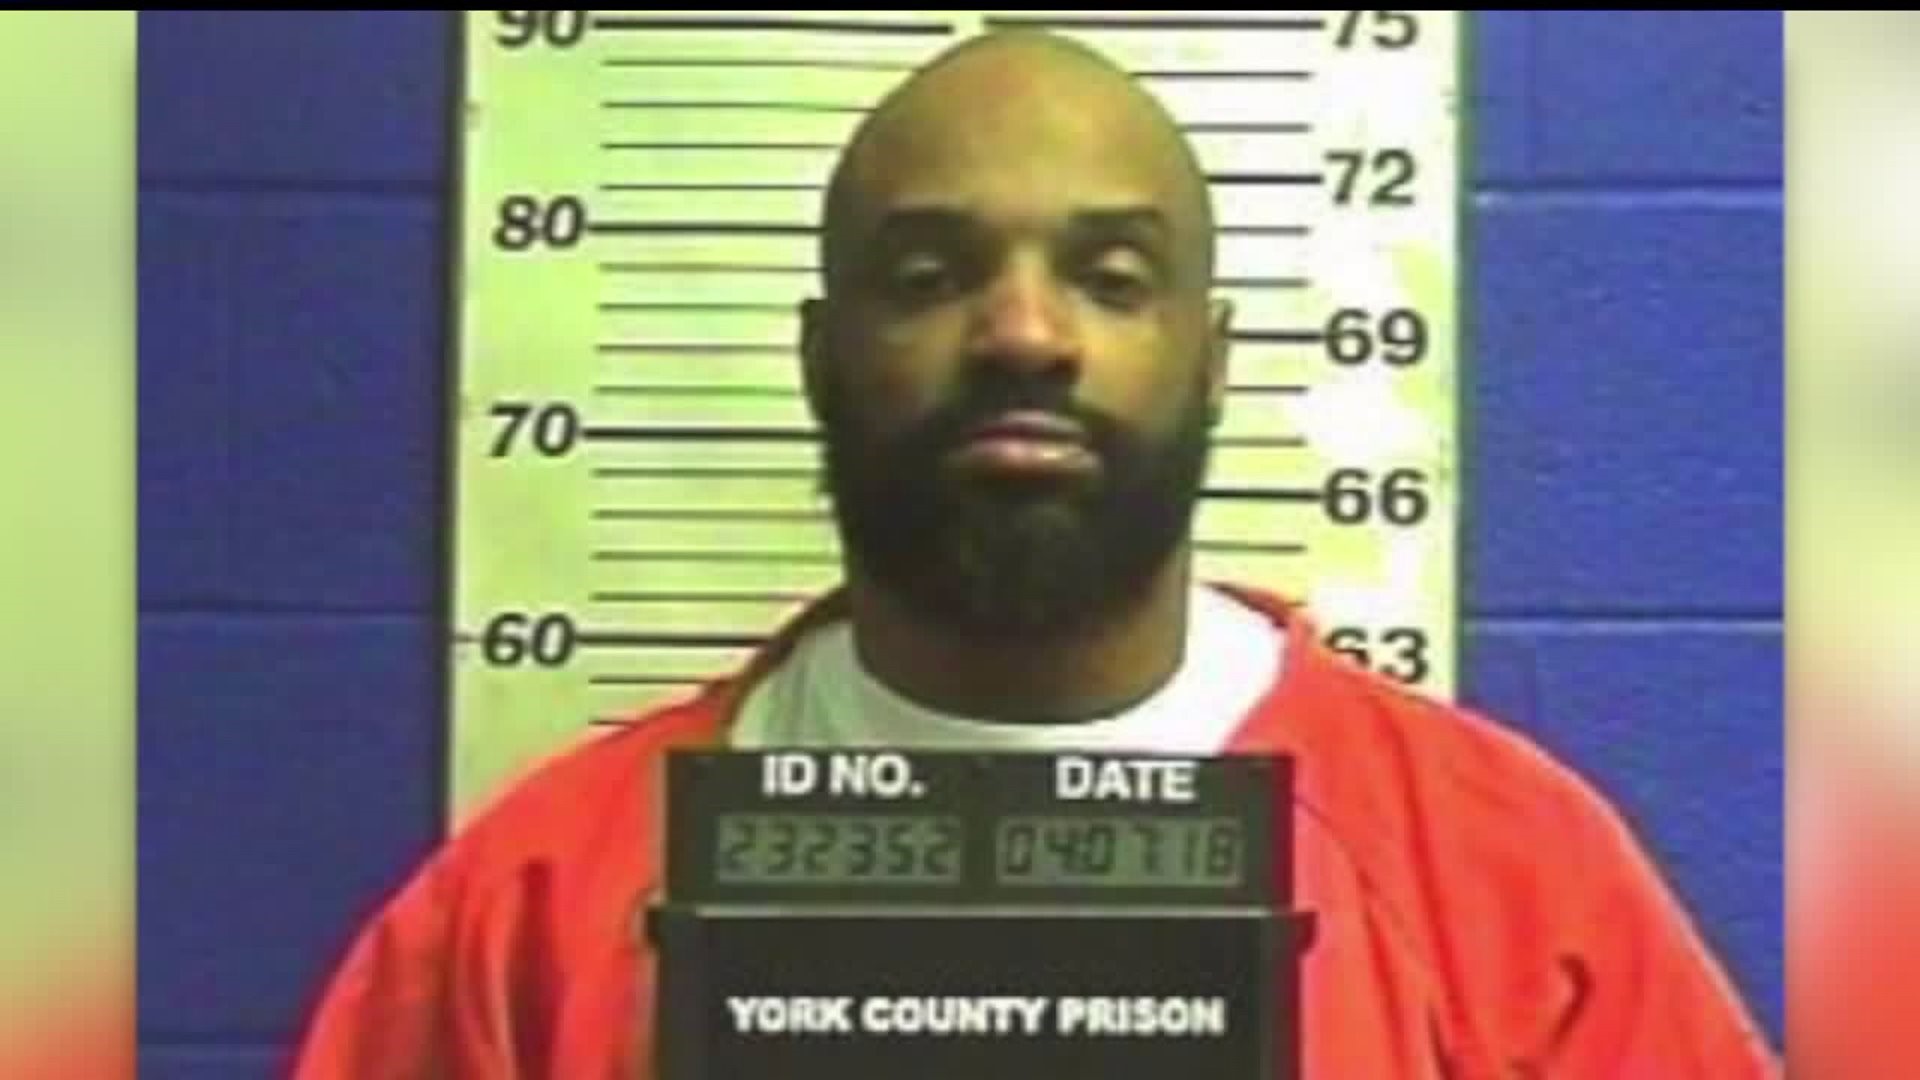 Everett Palmer Jr. was hit twice with stun gun during scuffle with York County Prison guards, autopsy report says